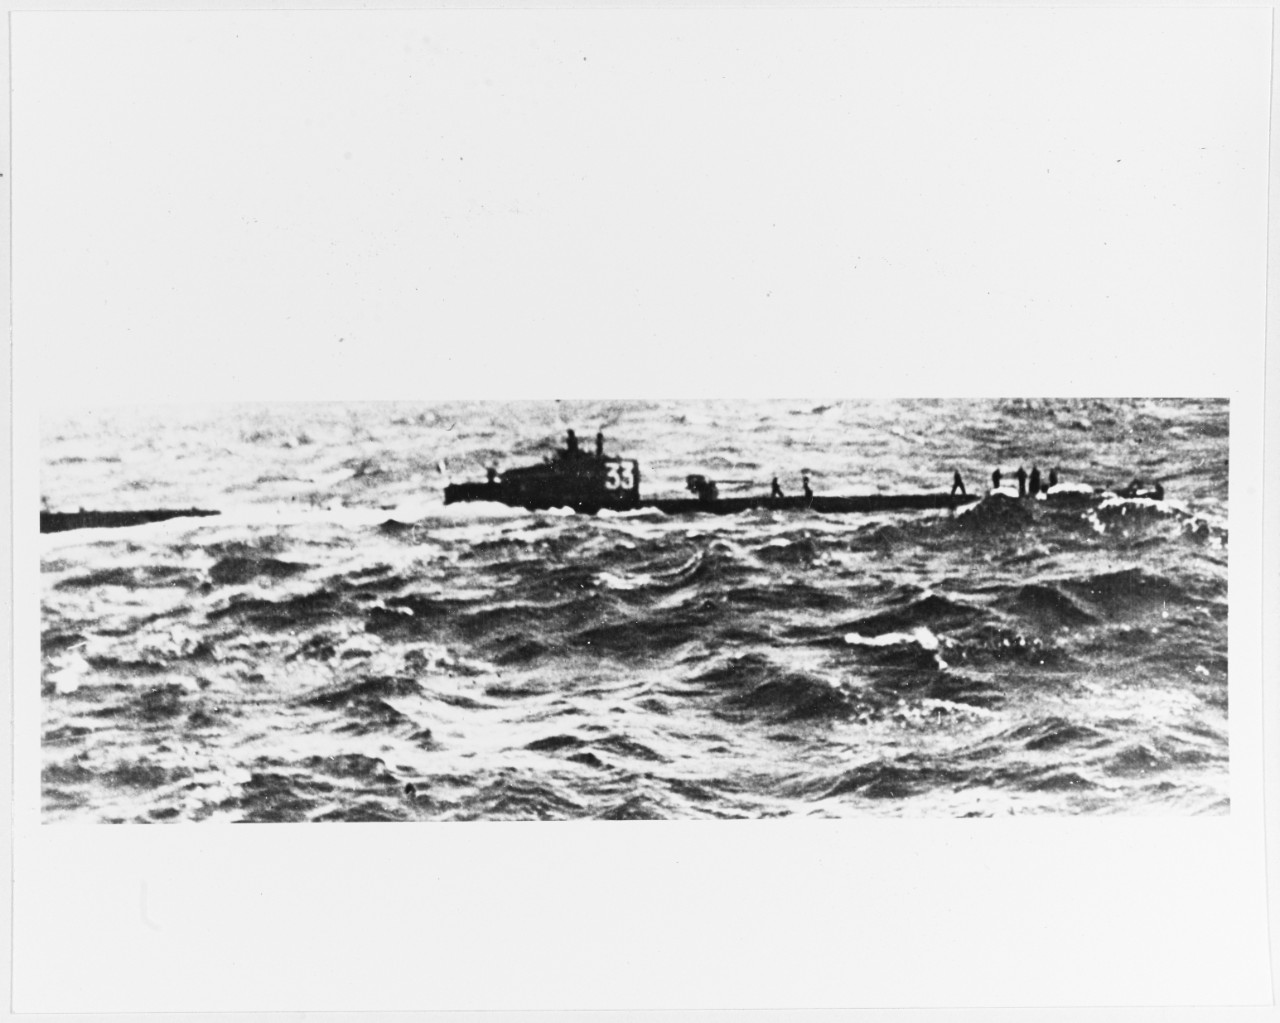 An unidentified French "1500-ton" type submarine in the Atlantic, 16 April 1942. 